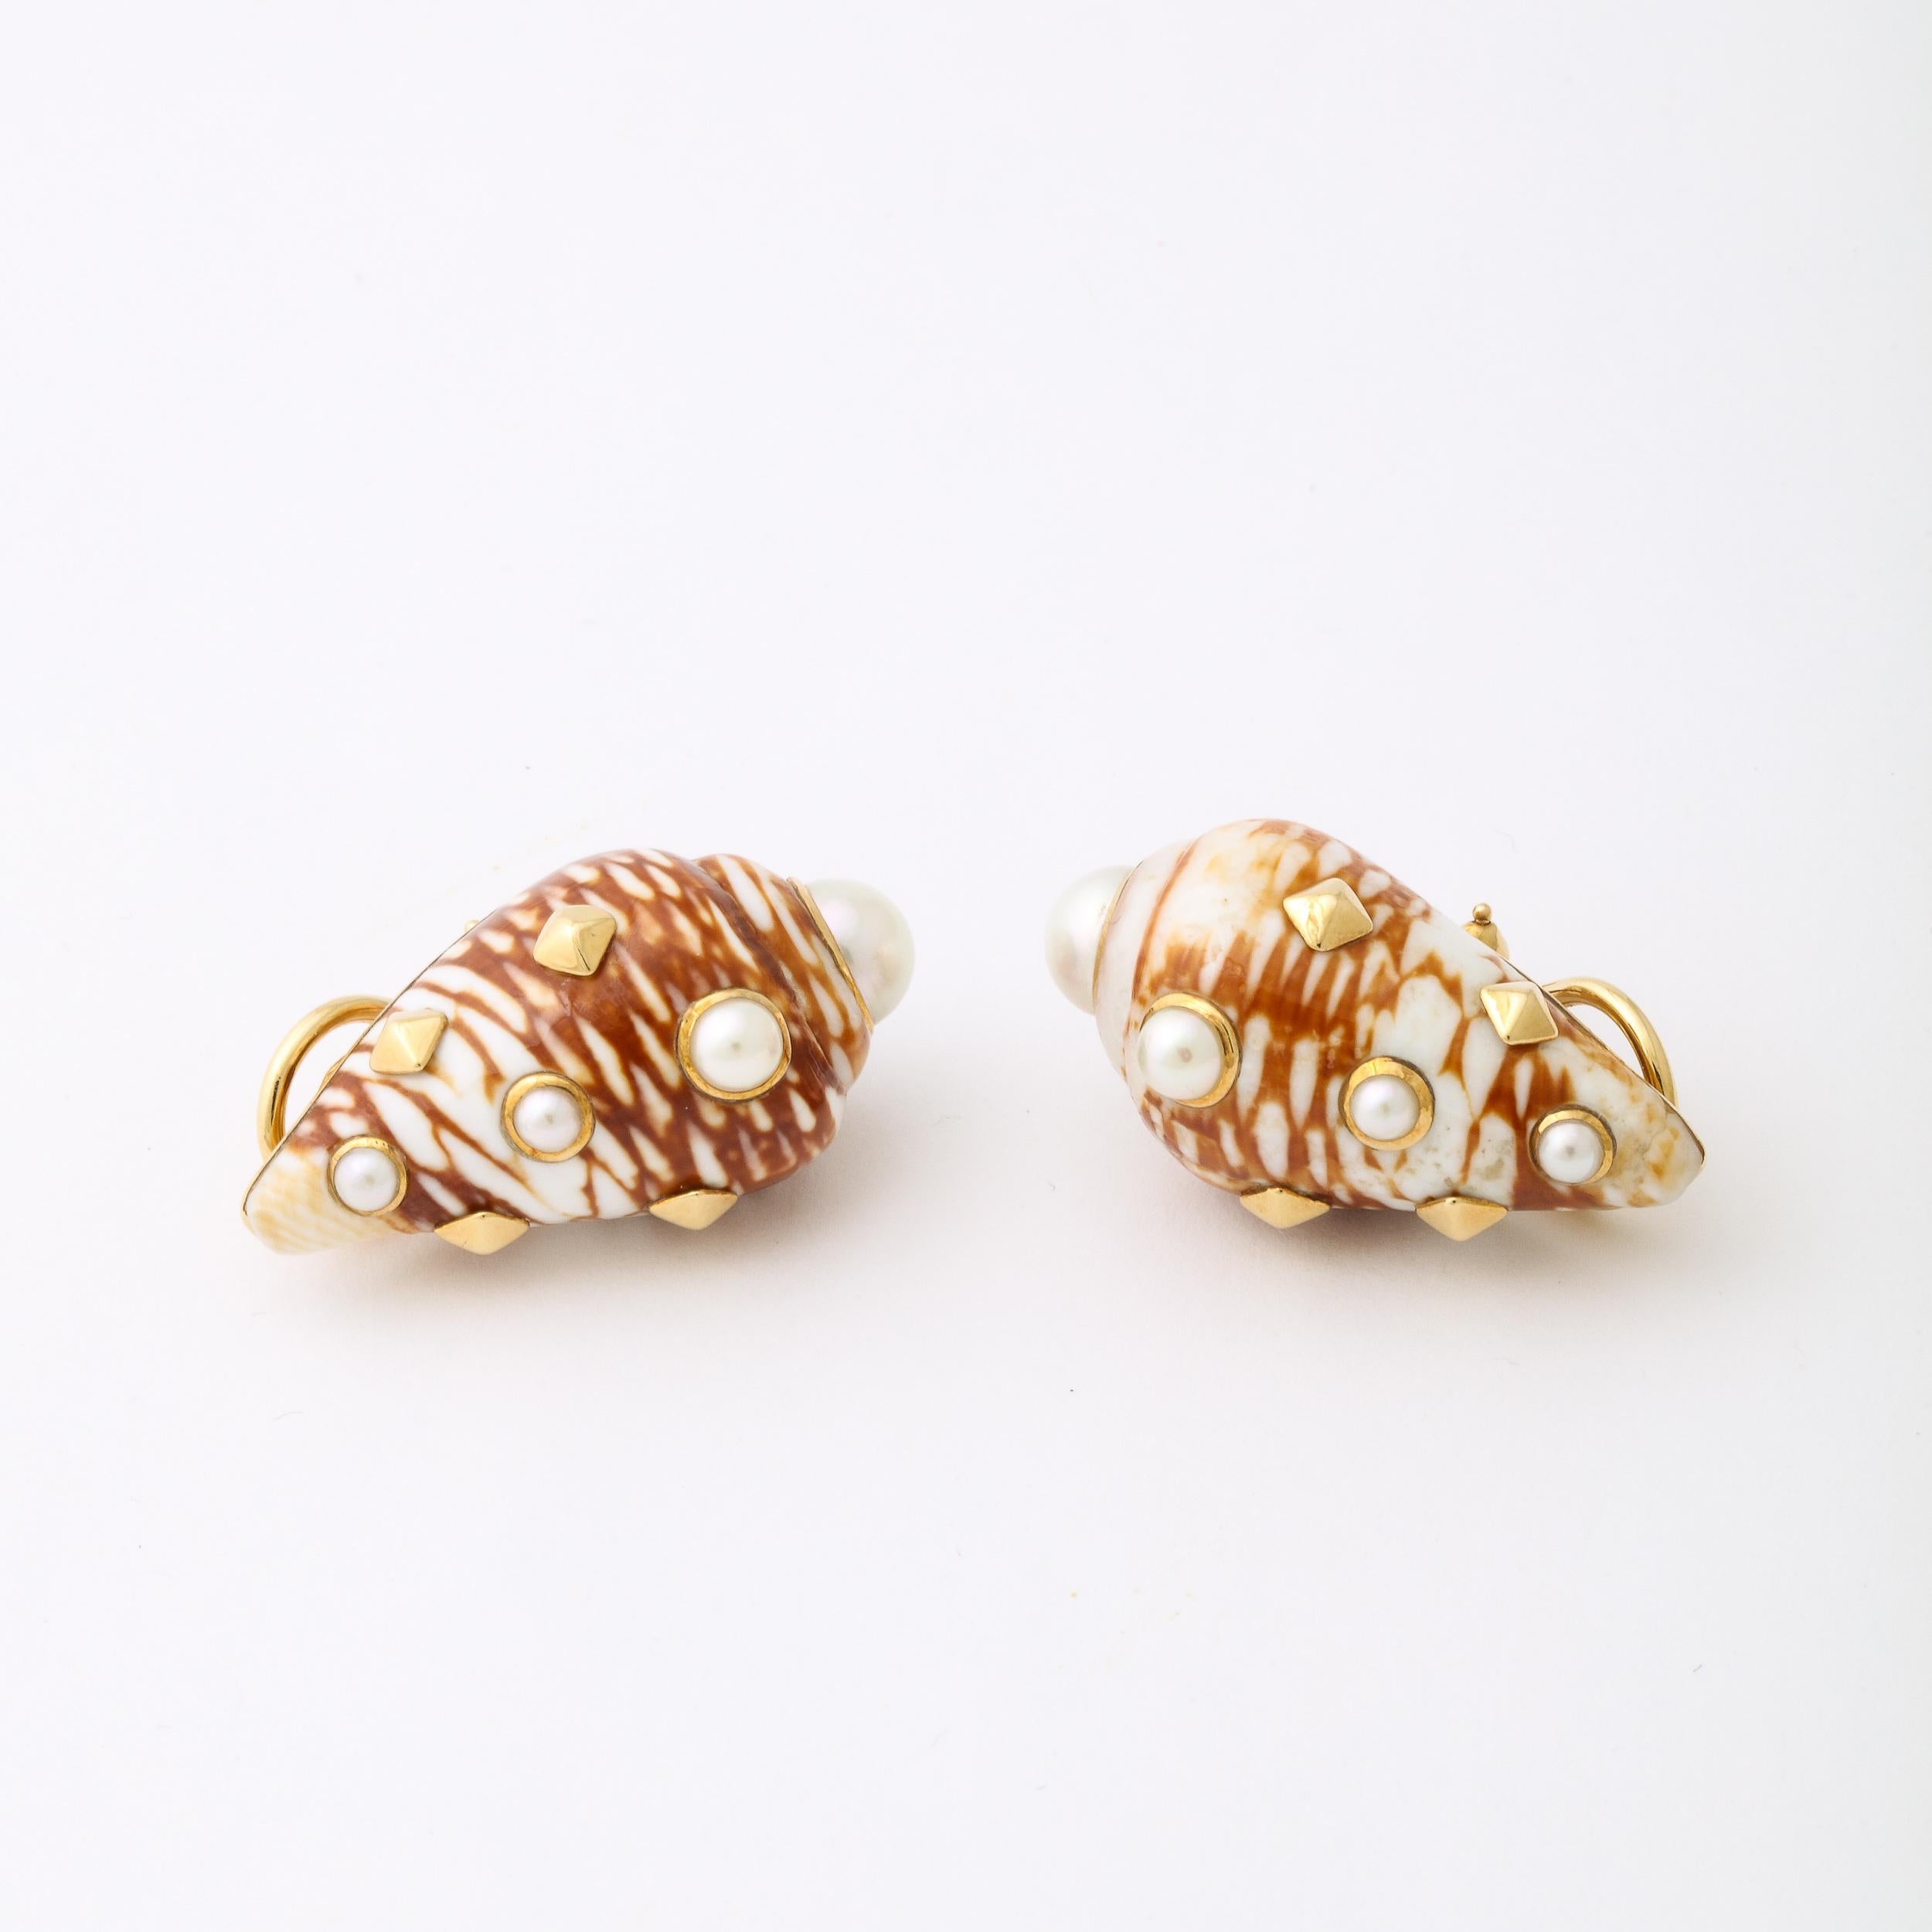 Red & Beige Shell Earrings Set in 18k Gold With Inlaid Pearls by Trianon For Sale 6